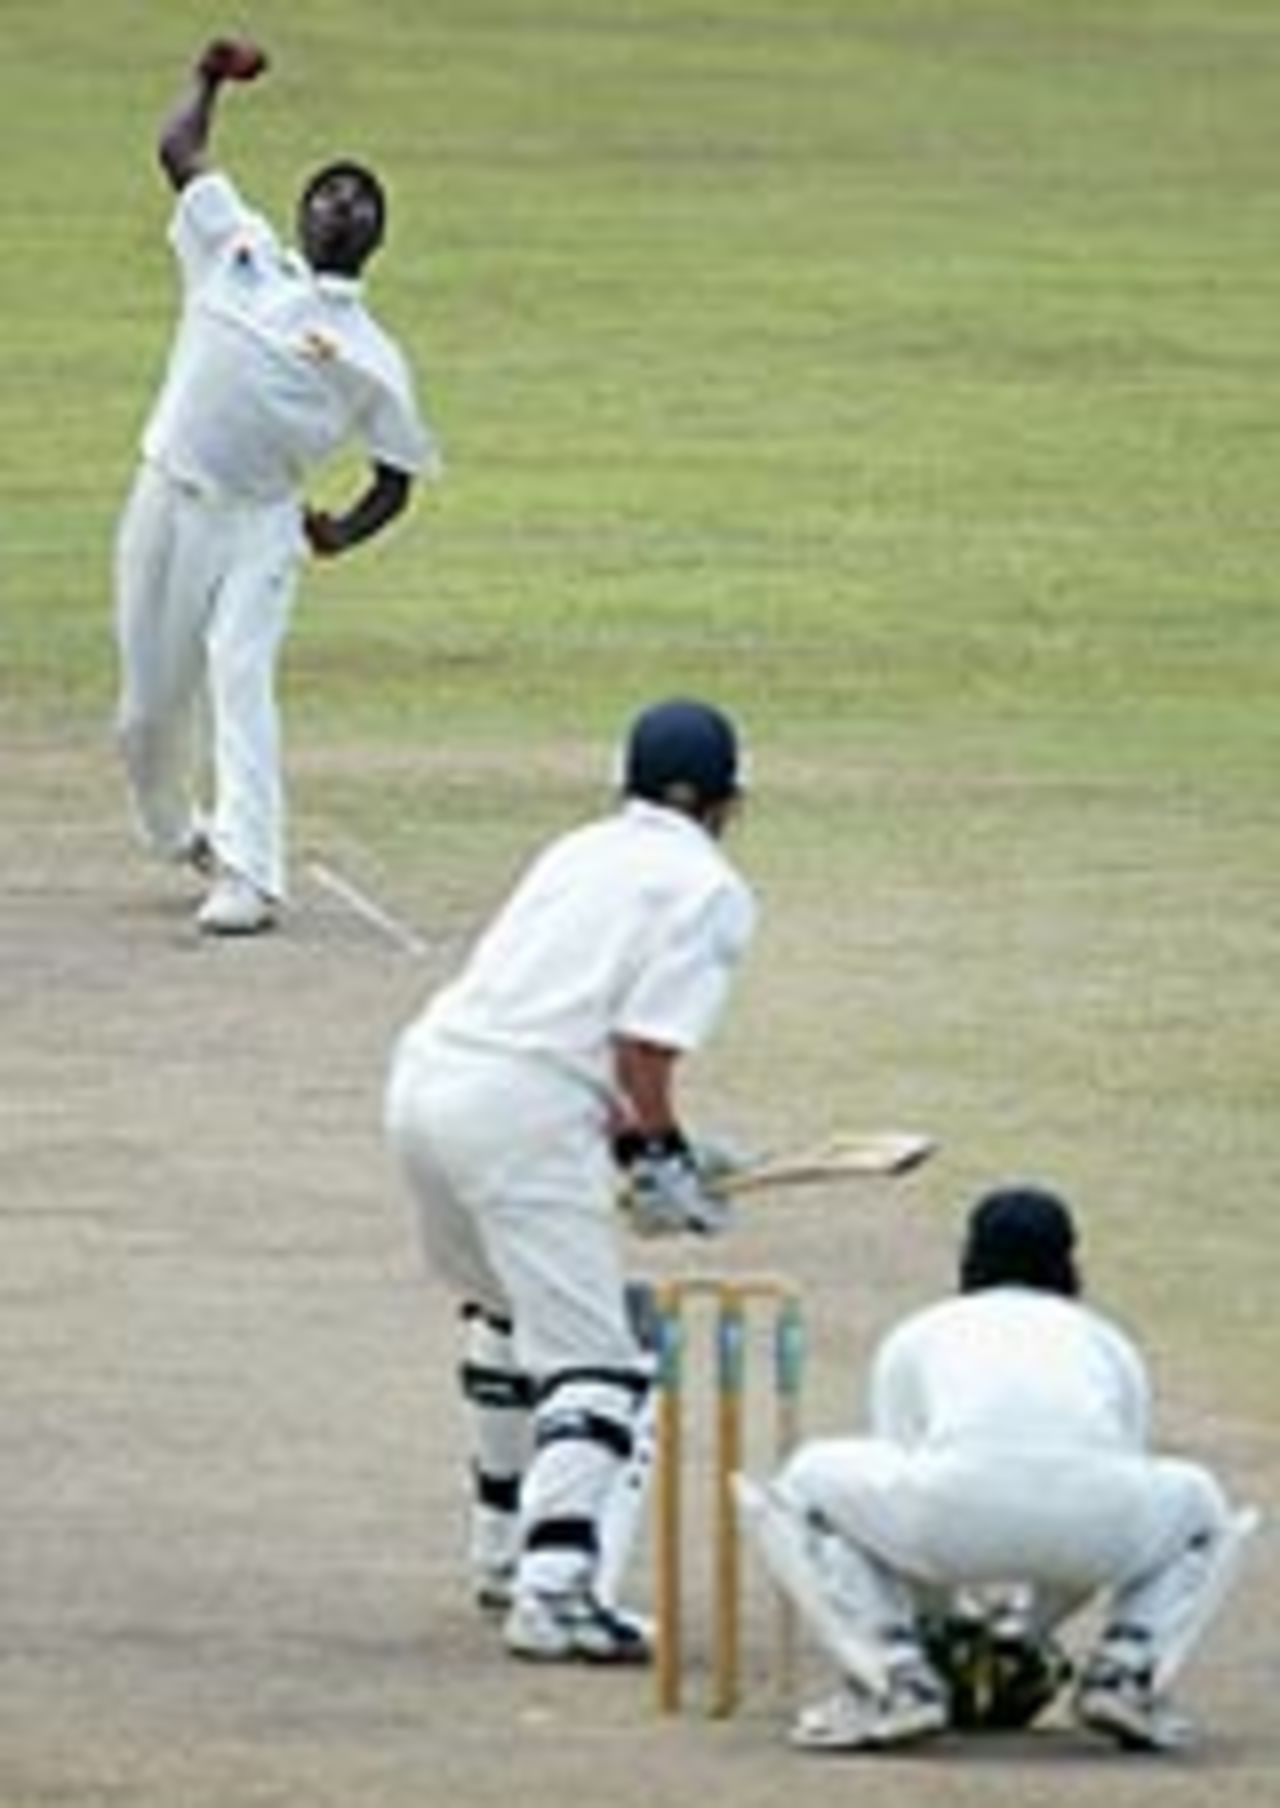 Watching the box - Collingwood faces Muralitharan at Galle